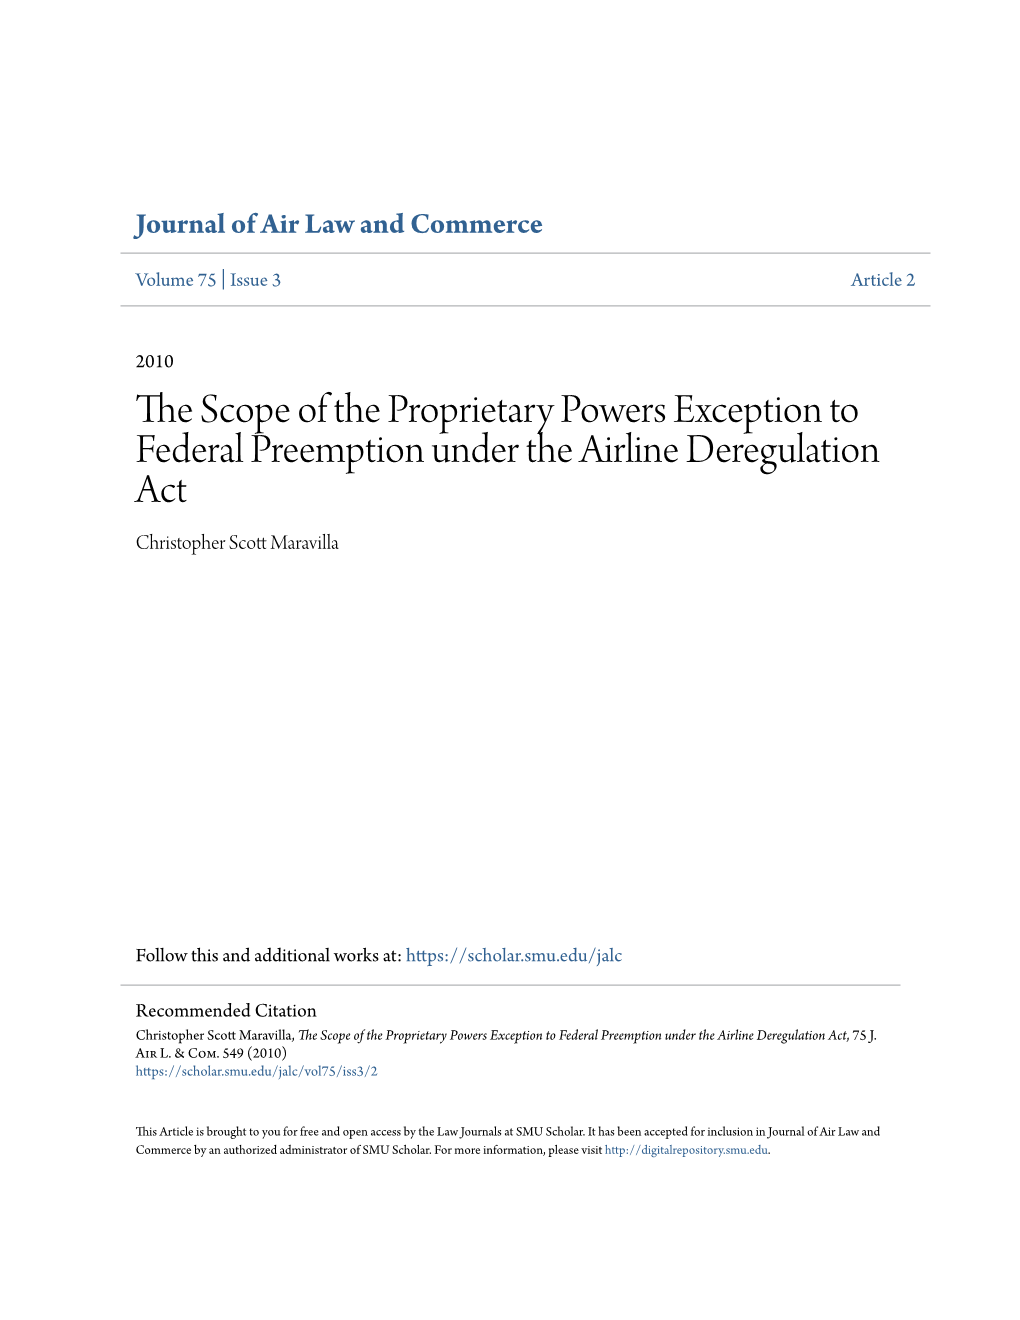 The Scope of the Proprietary Powers Exception to Federal Preemption Under the Airline Deregulation Act, 75 J